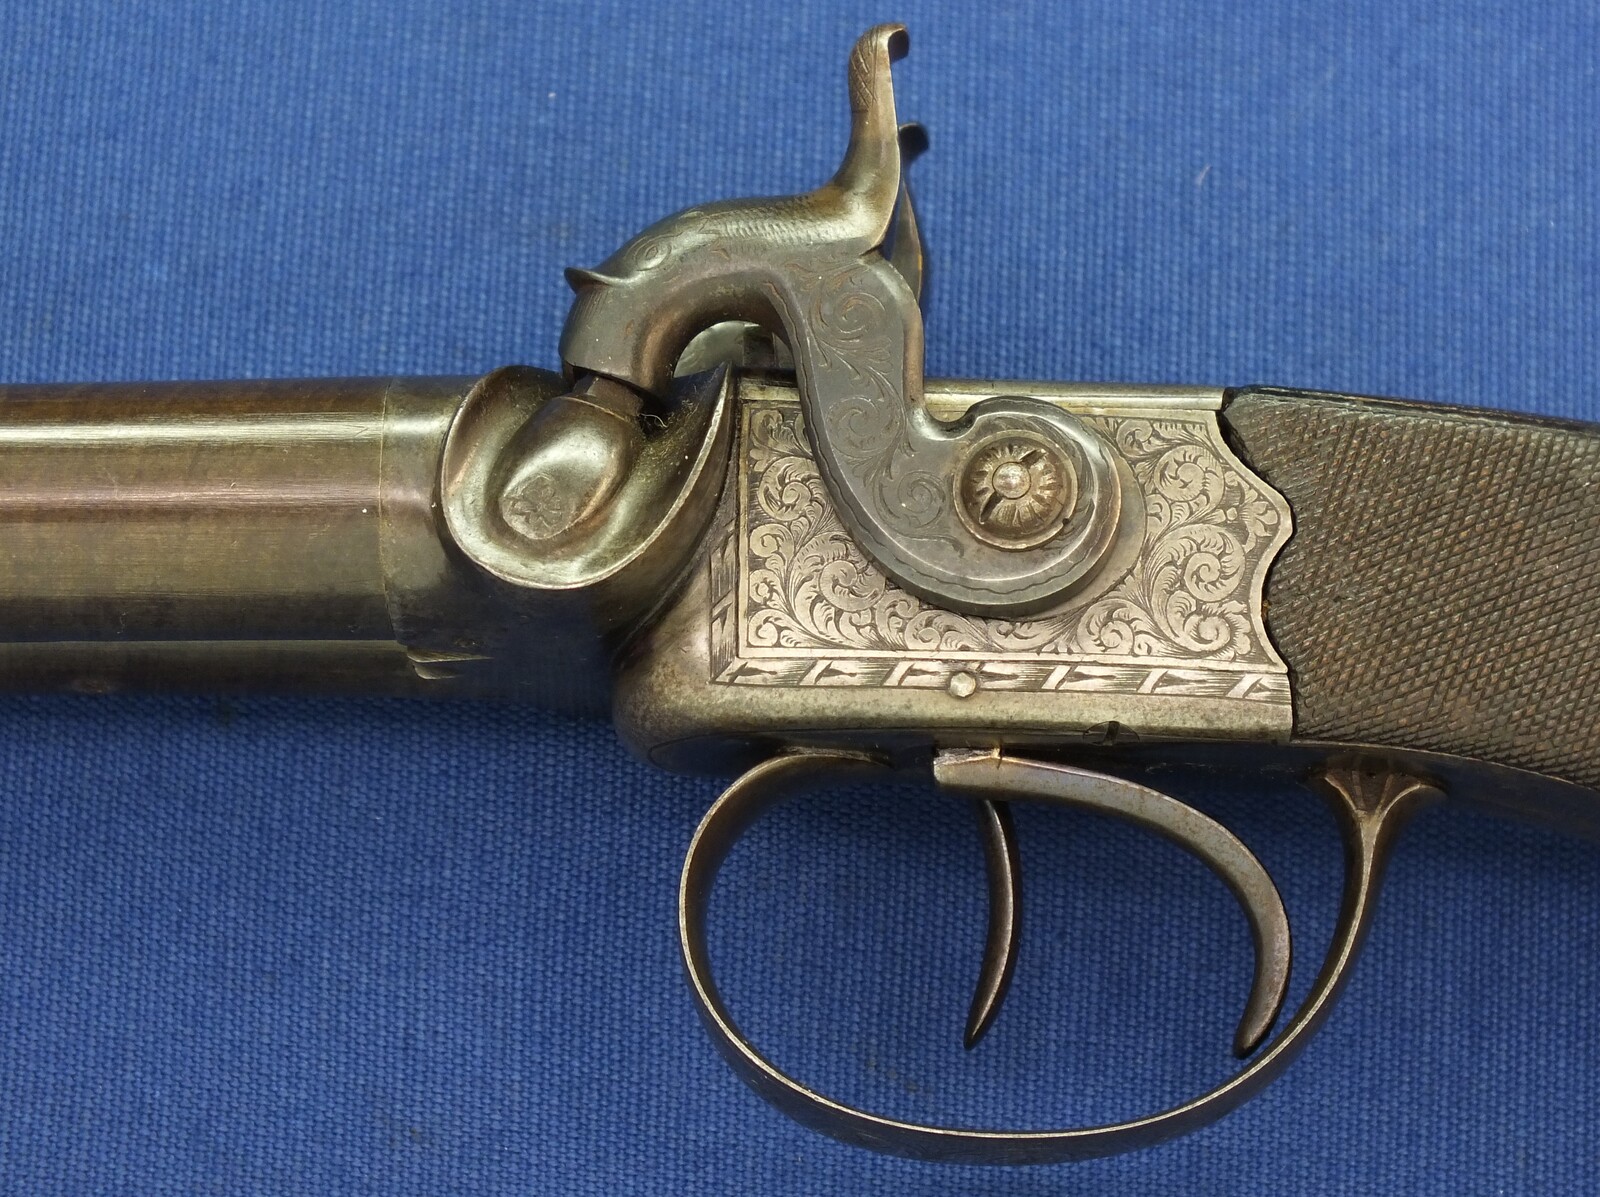 An antique English 19th century circa 1850 Box-Lock percussion double barreled pistol. By George Adams. Caliber 12mm. Length 25,5cm. In very good condition. Price 950 euro.